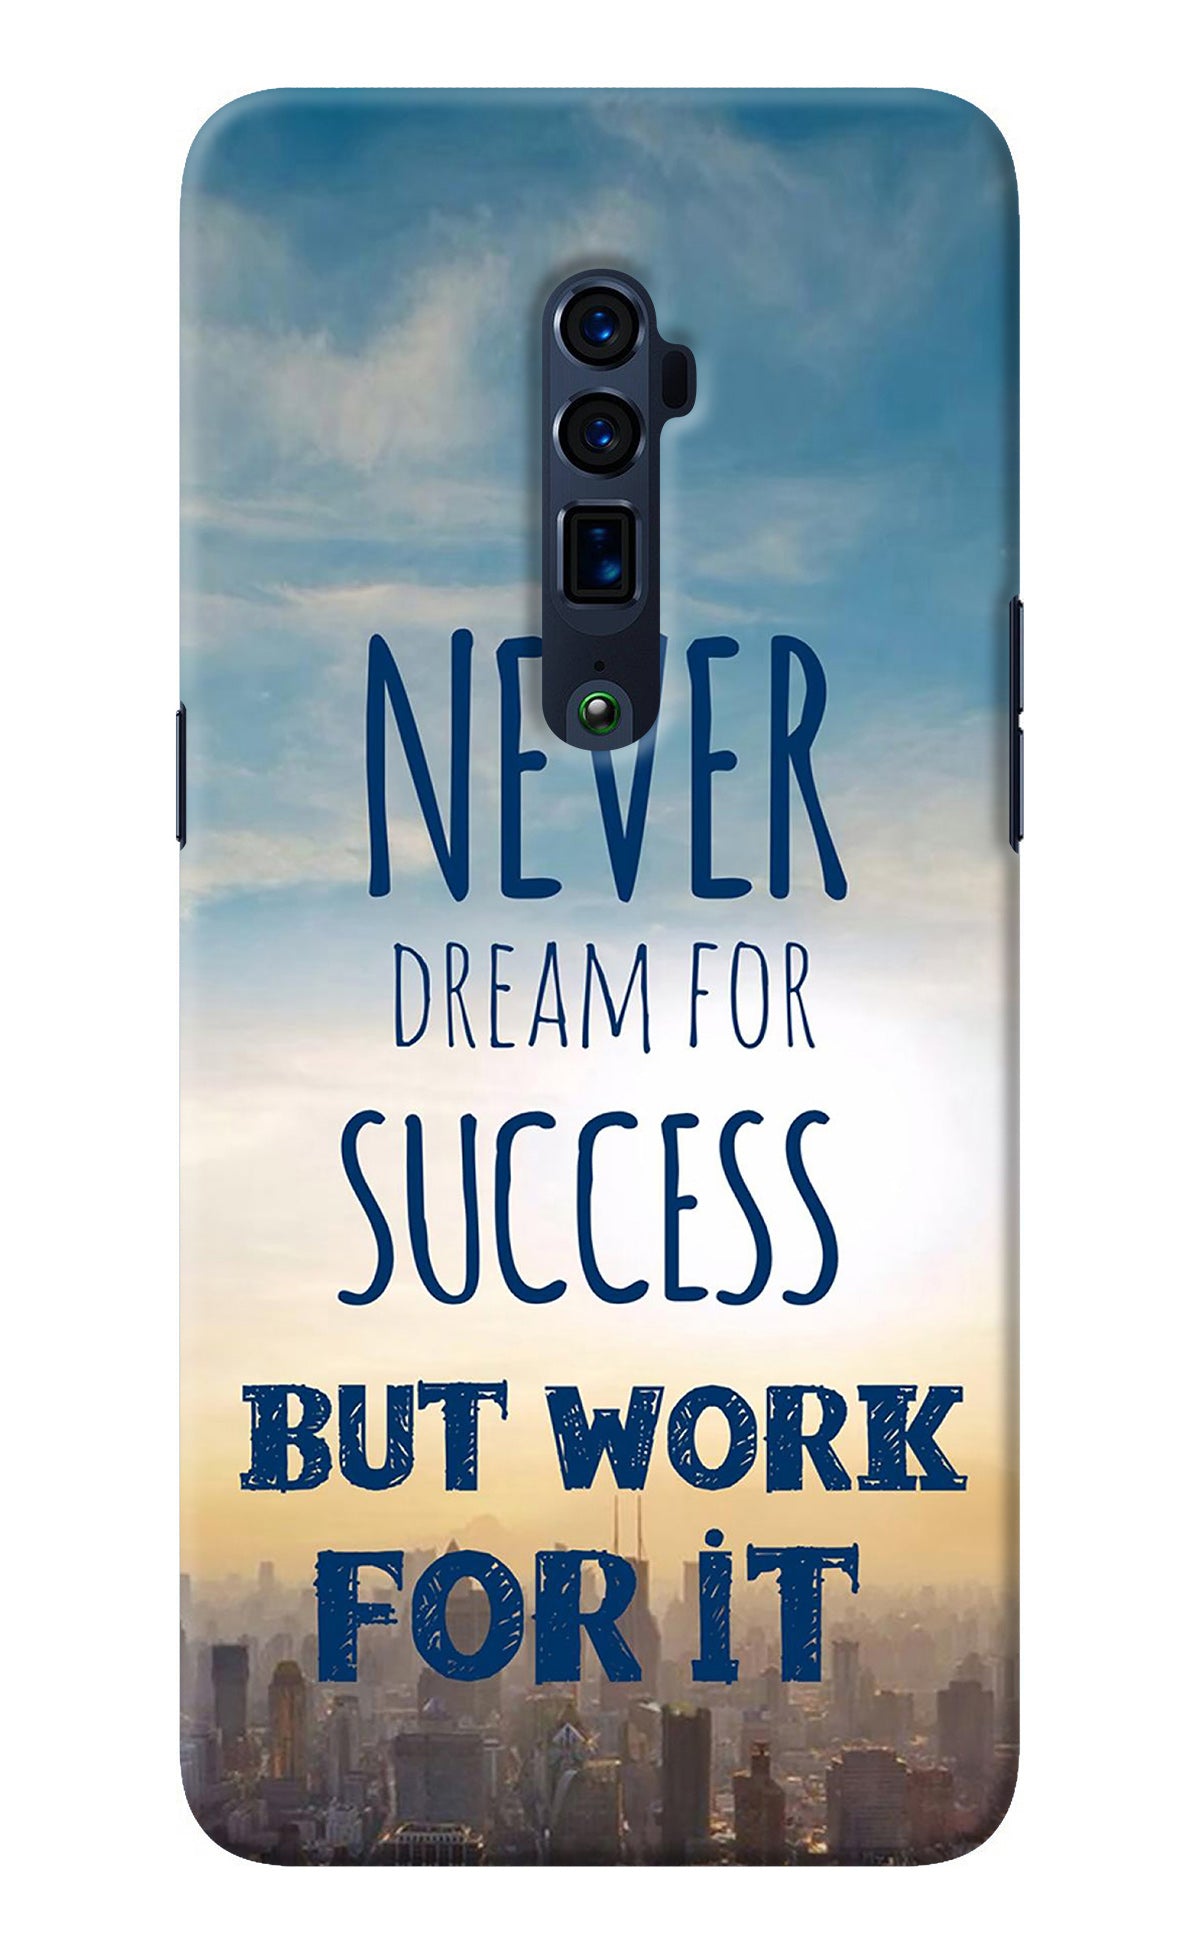 Never Dream For Success But Work For It Oppo Reno 10x Zoom Back Cover